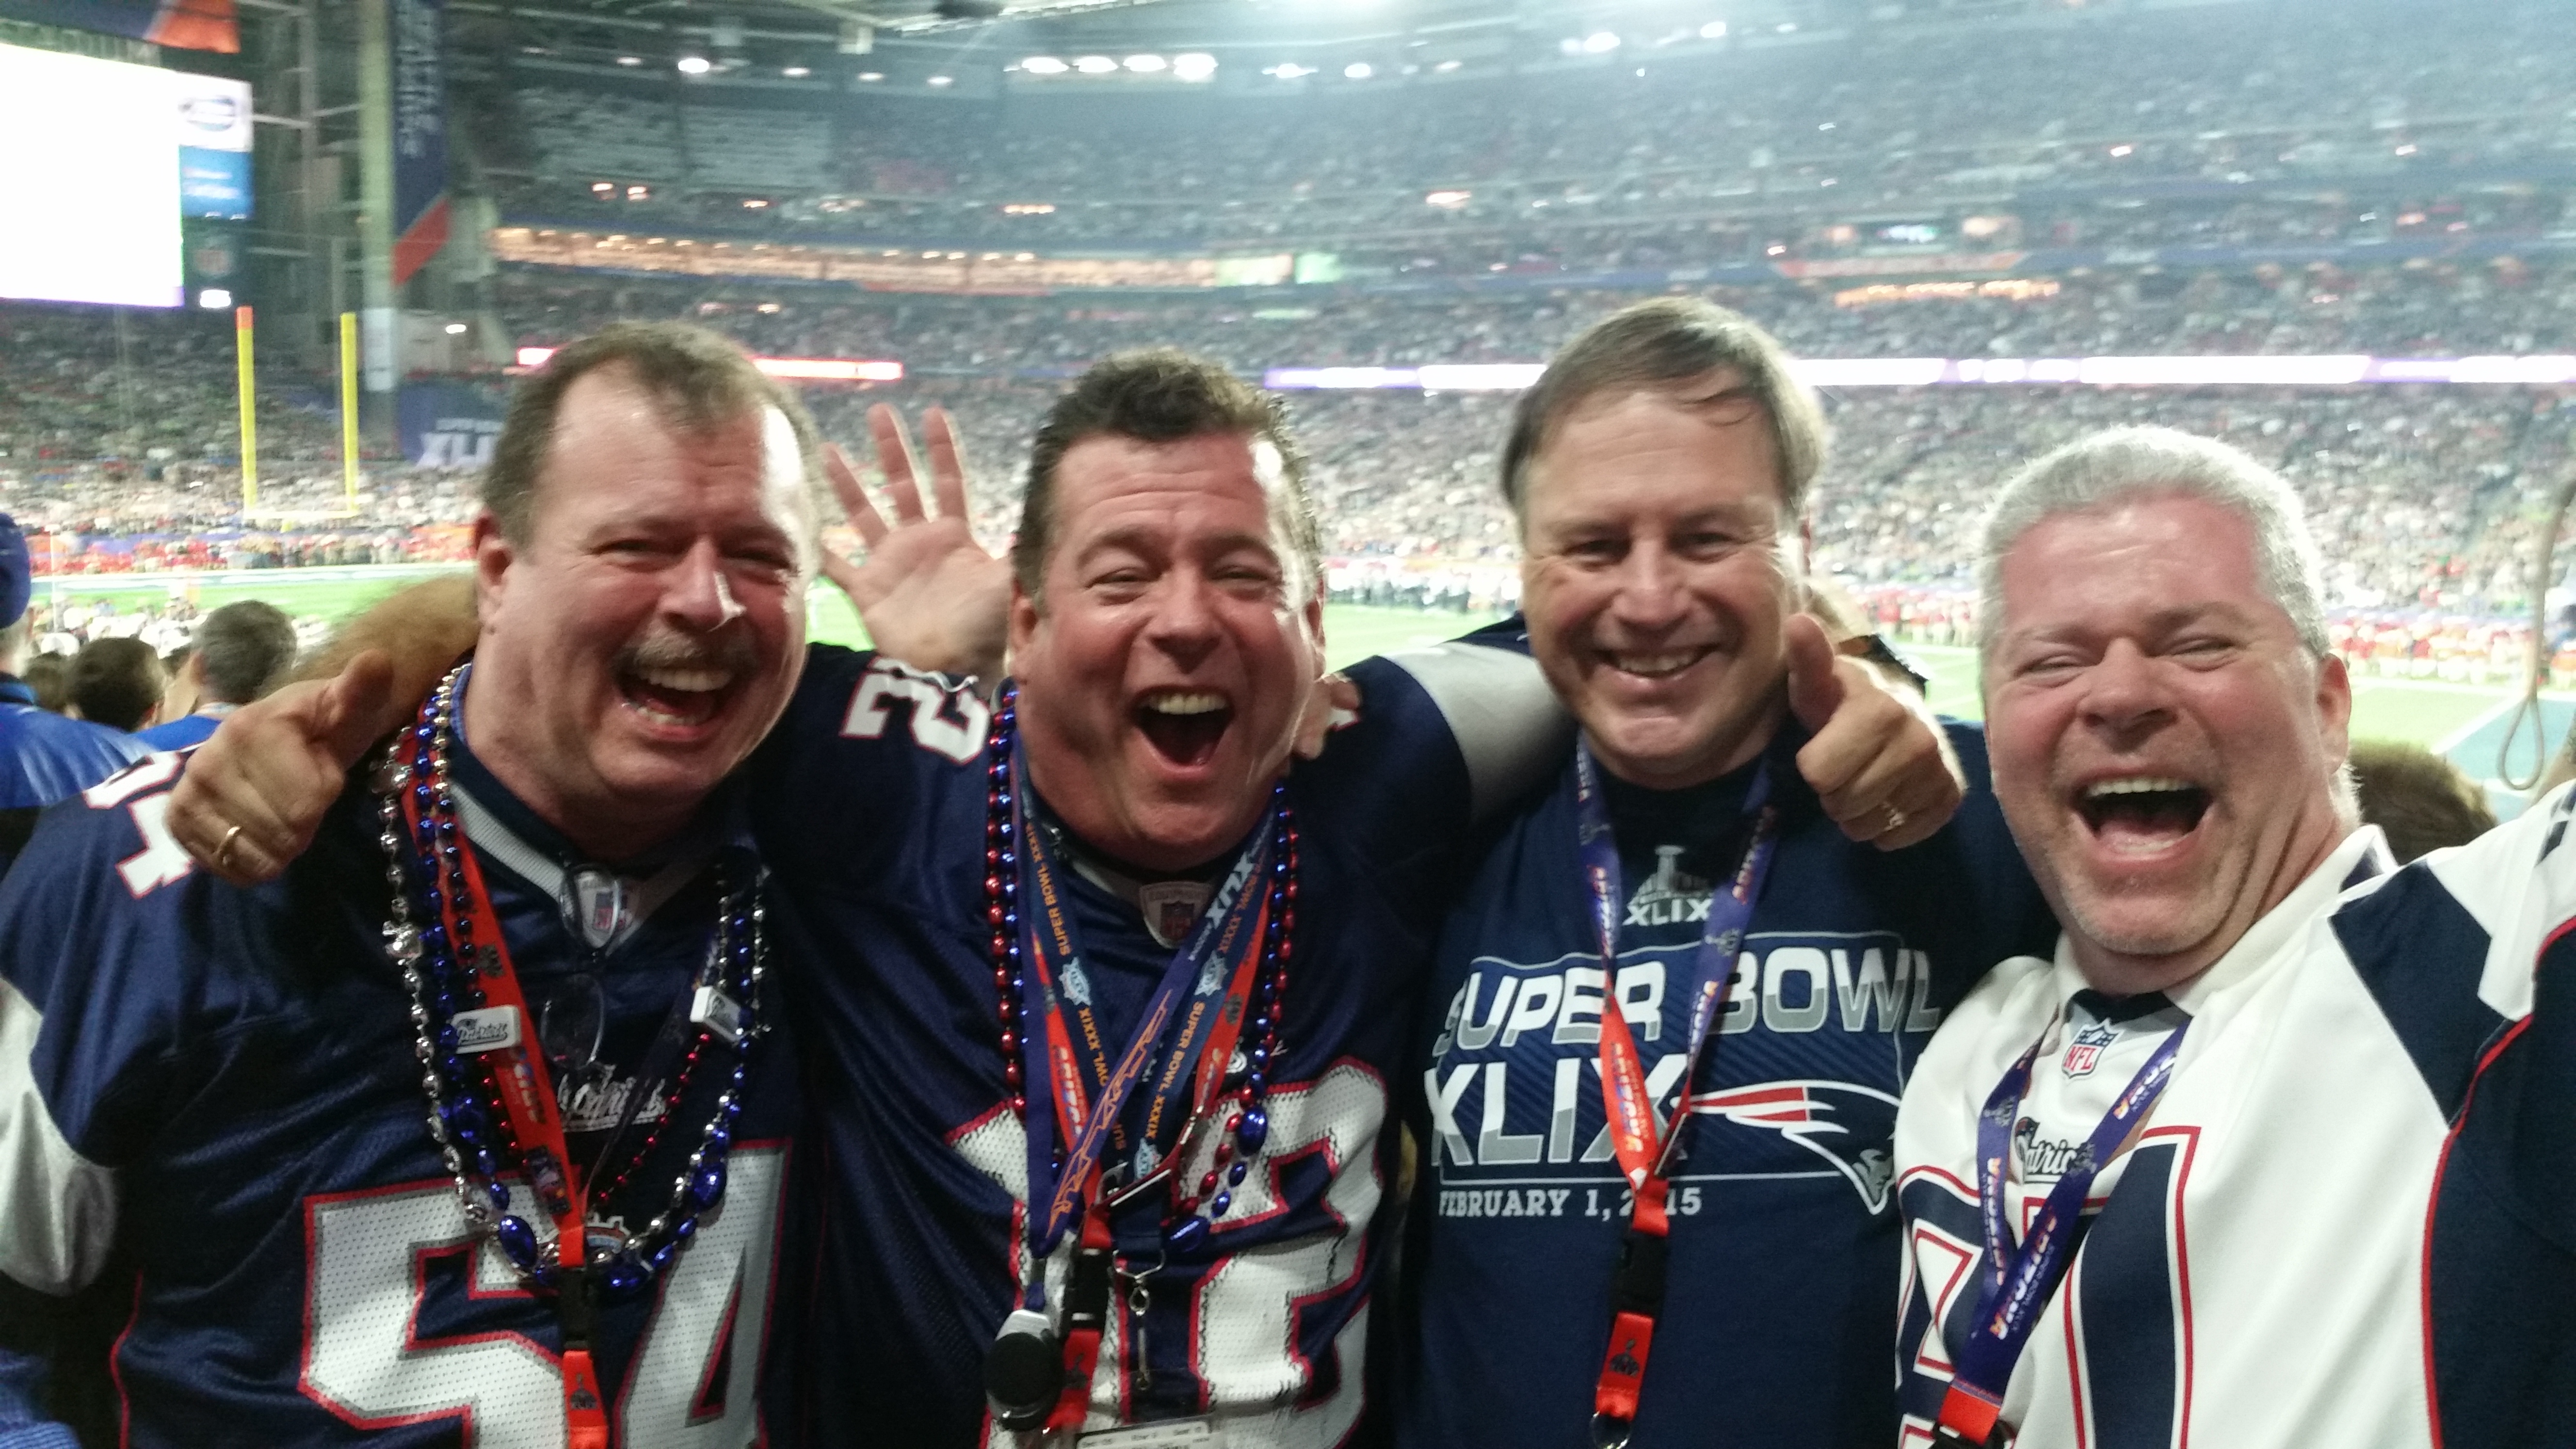 Super-fan Kelly, left, with two brothers and a friend at Super Bowl XLIX, 30 seconds after the Patriots' victory.